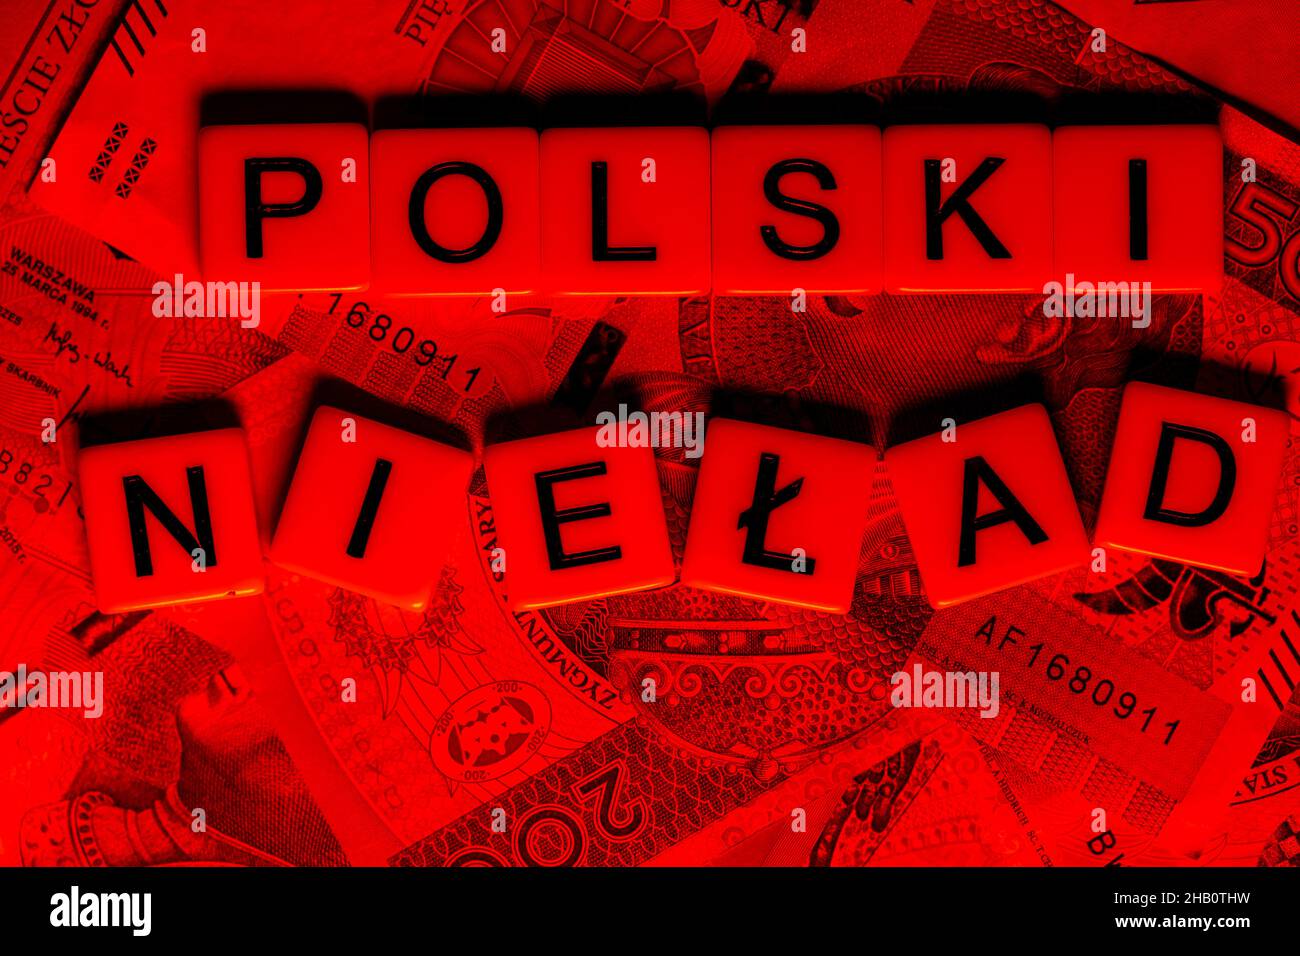 The sentence 'Polski Ład' translated as  'Polish Order' and many Polish banknotes. New taxation rules in Poland. Photo taken in aggressive red light. Stock Photo